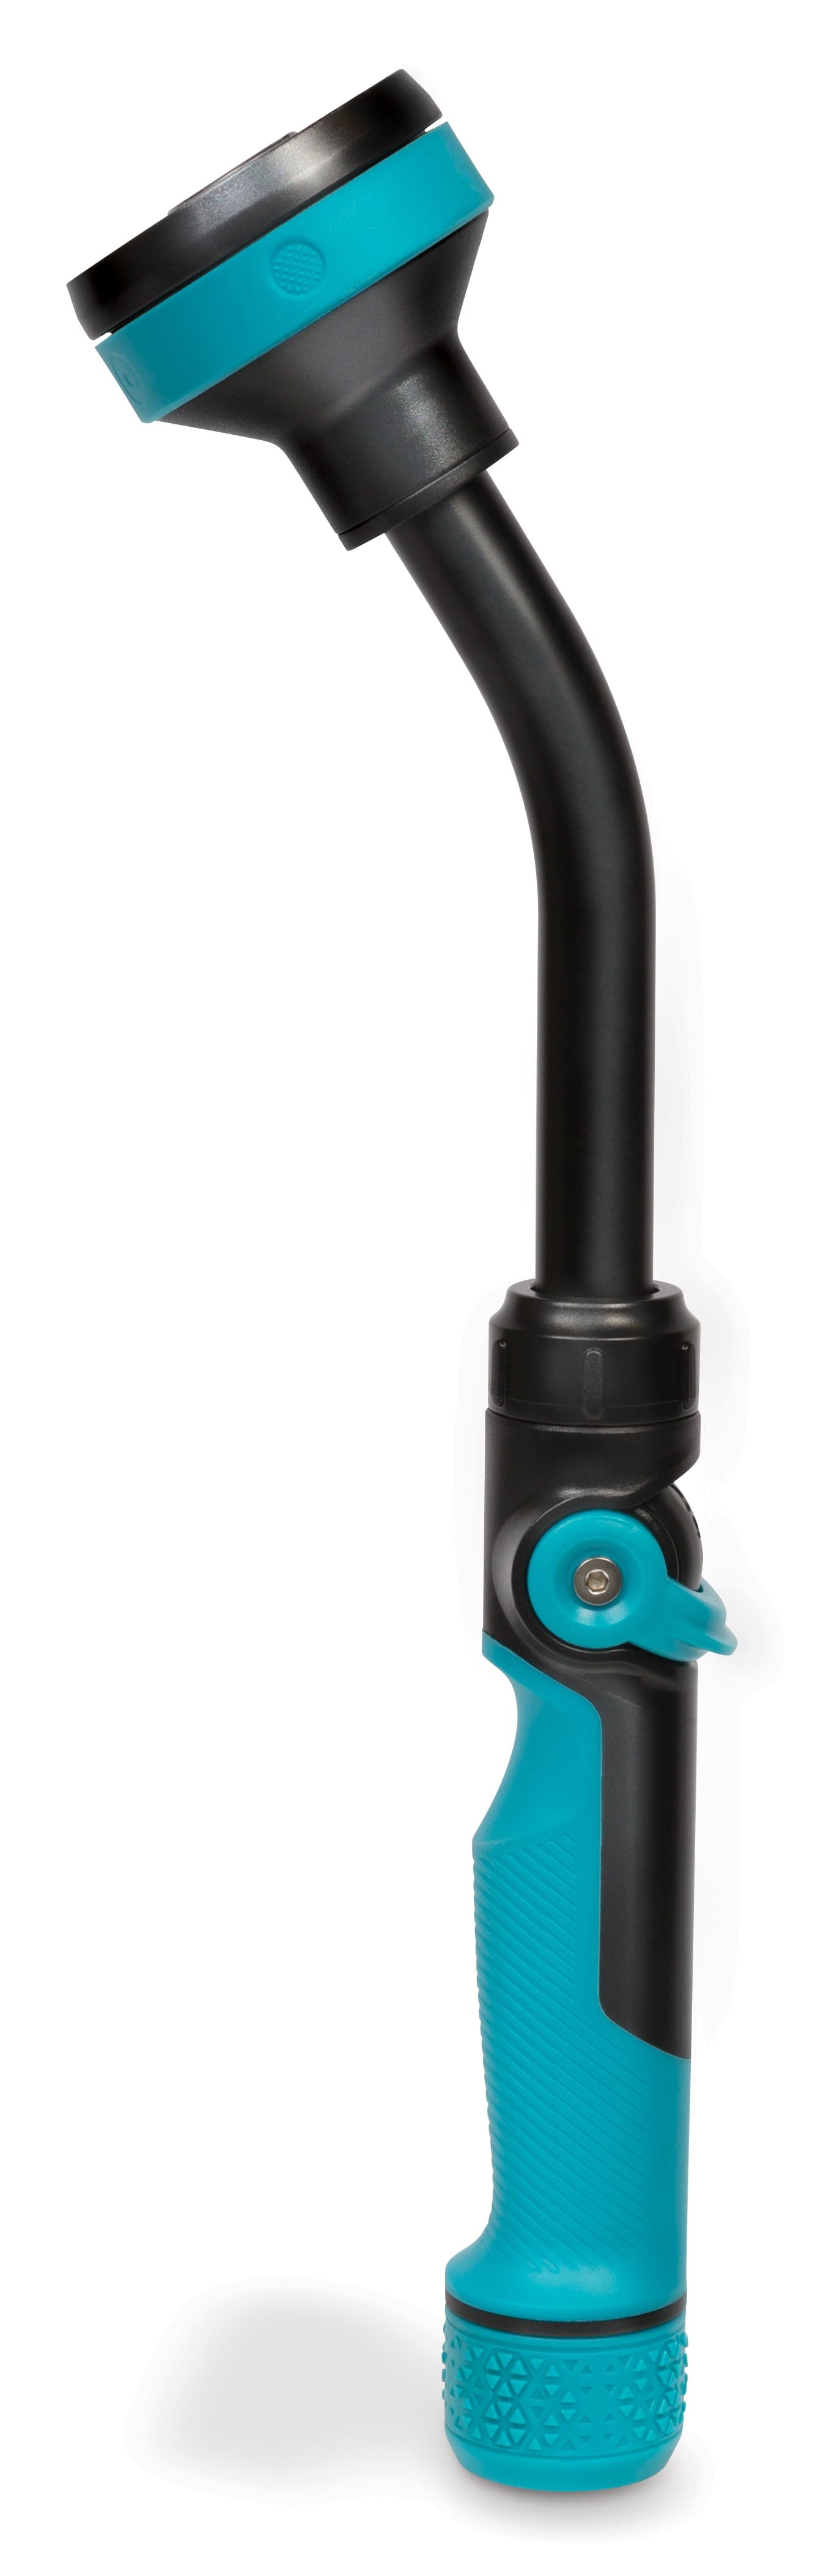 Gilmour Heavy Duty Swivel Connect Compact Watering Wand (Aqua Black)